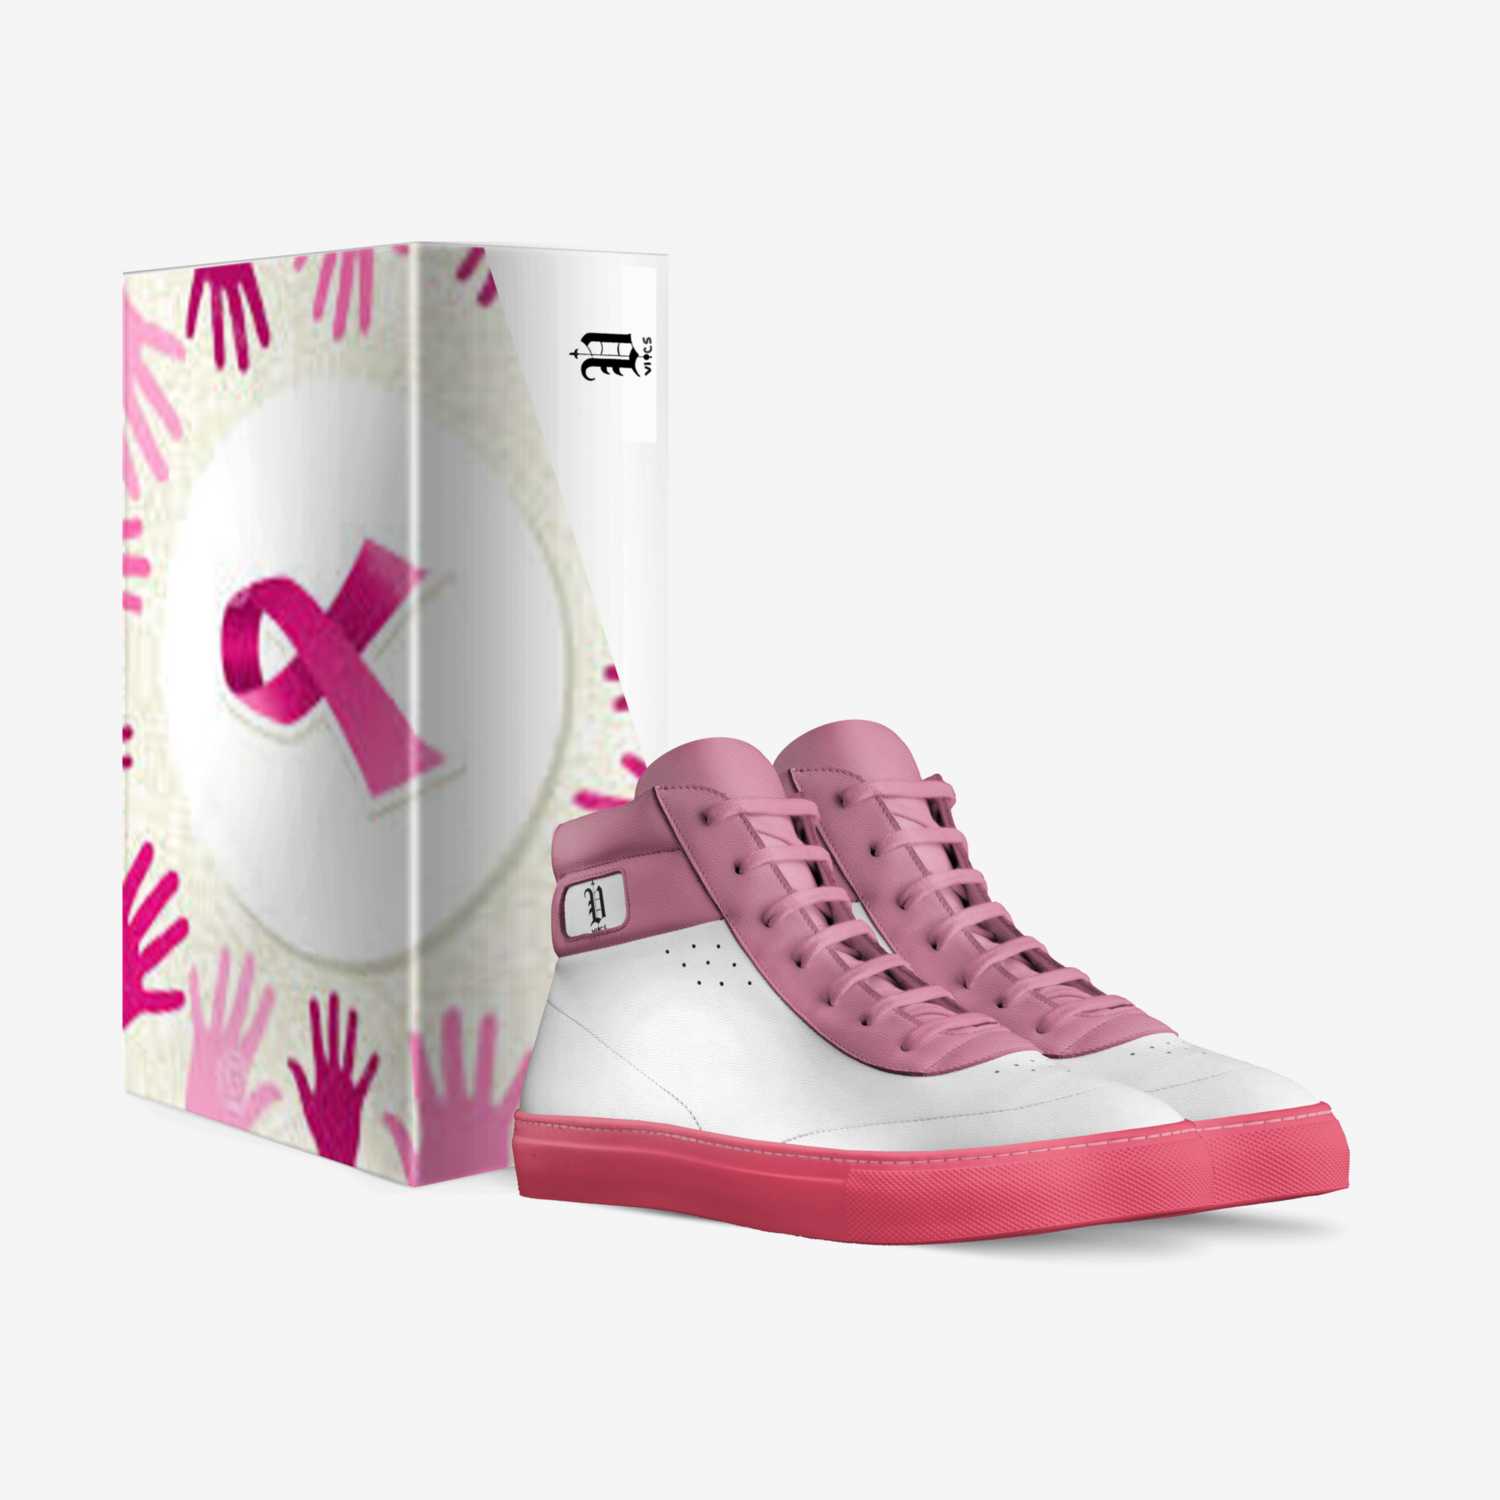 Vics pink custom made in Italy shoes by Brayden Murphy | Box view